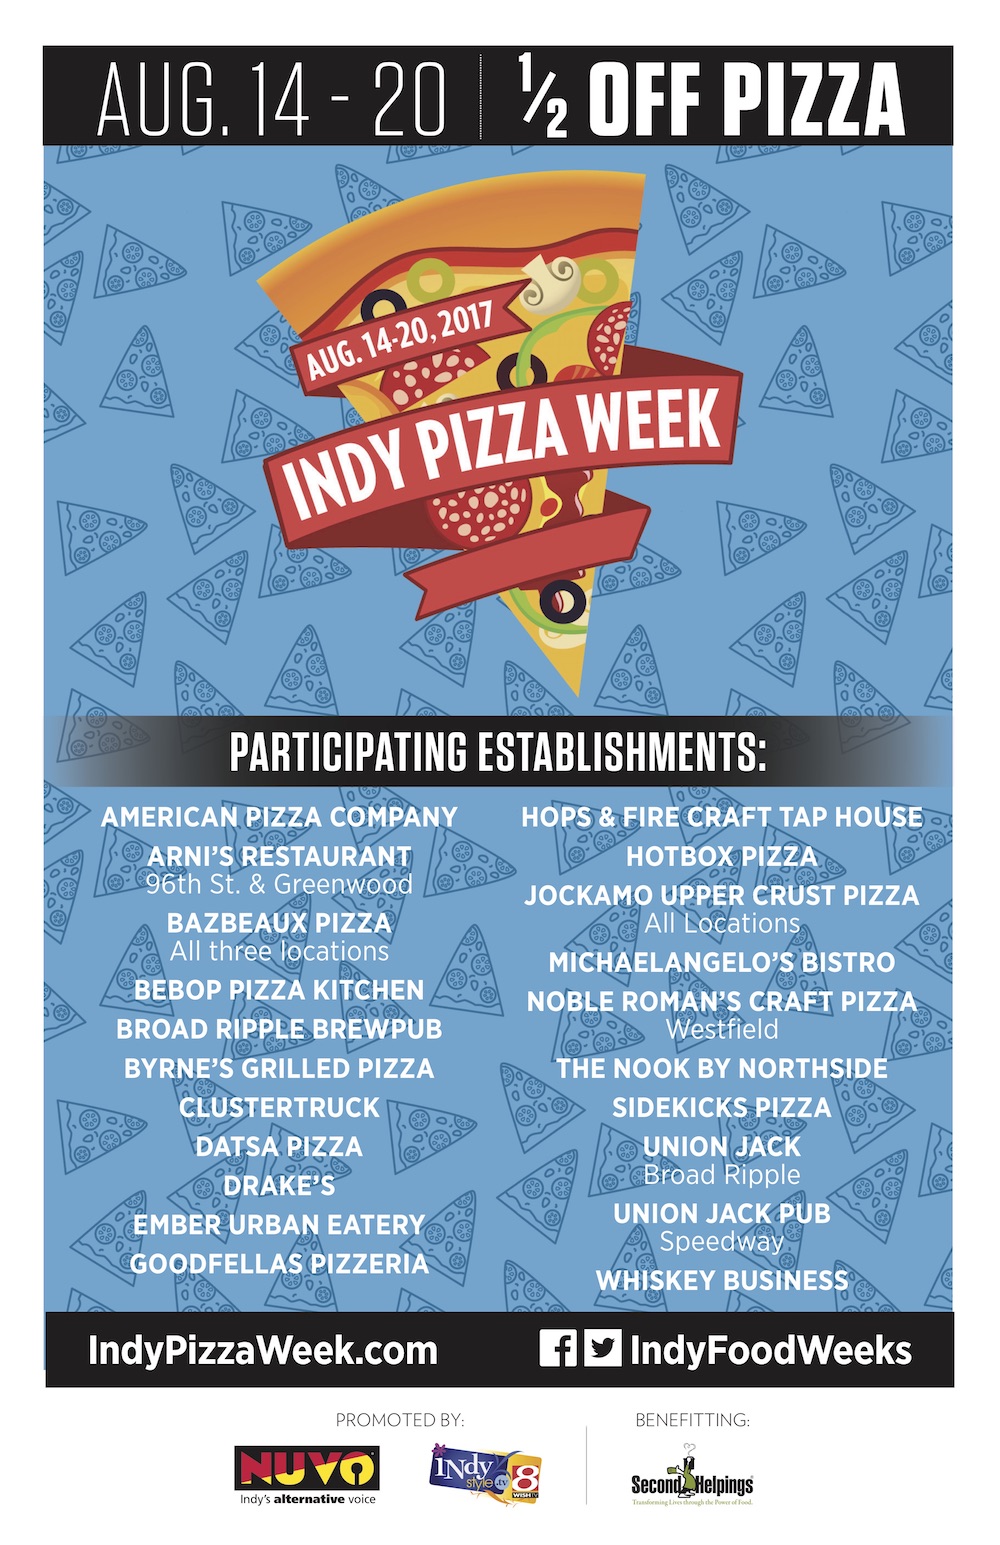 Indy Pizza Week